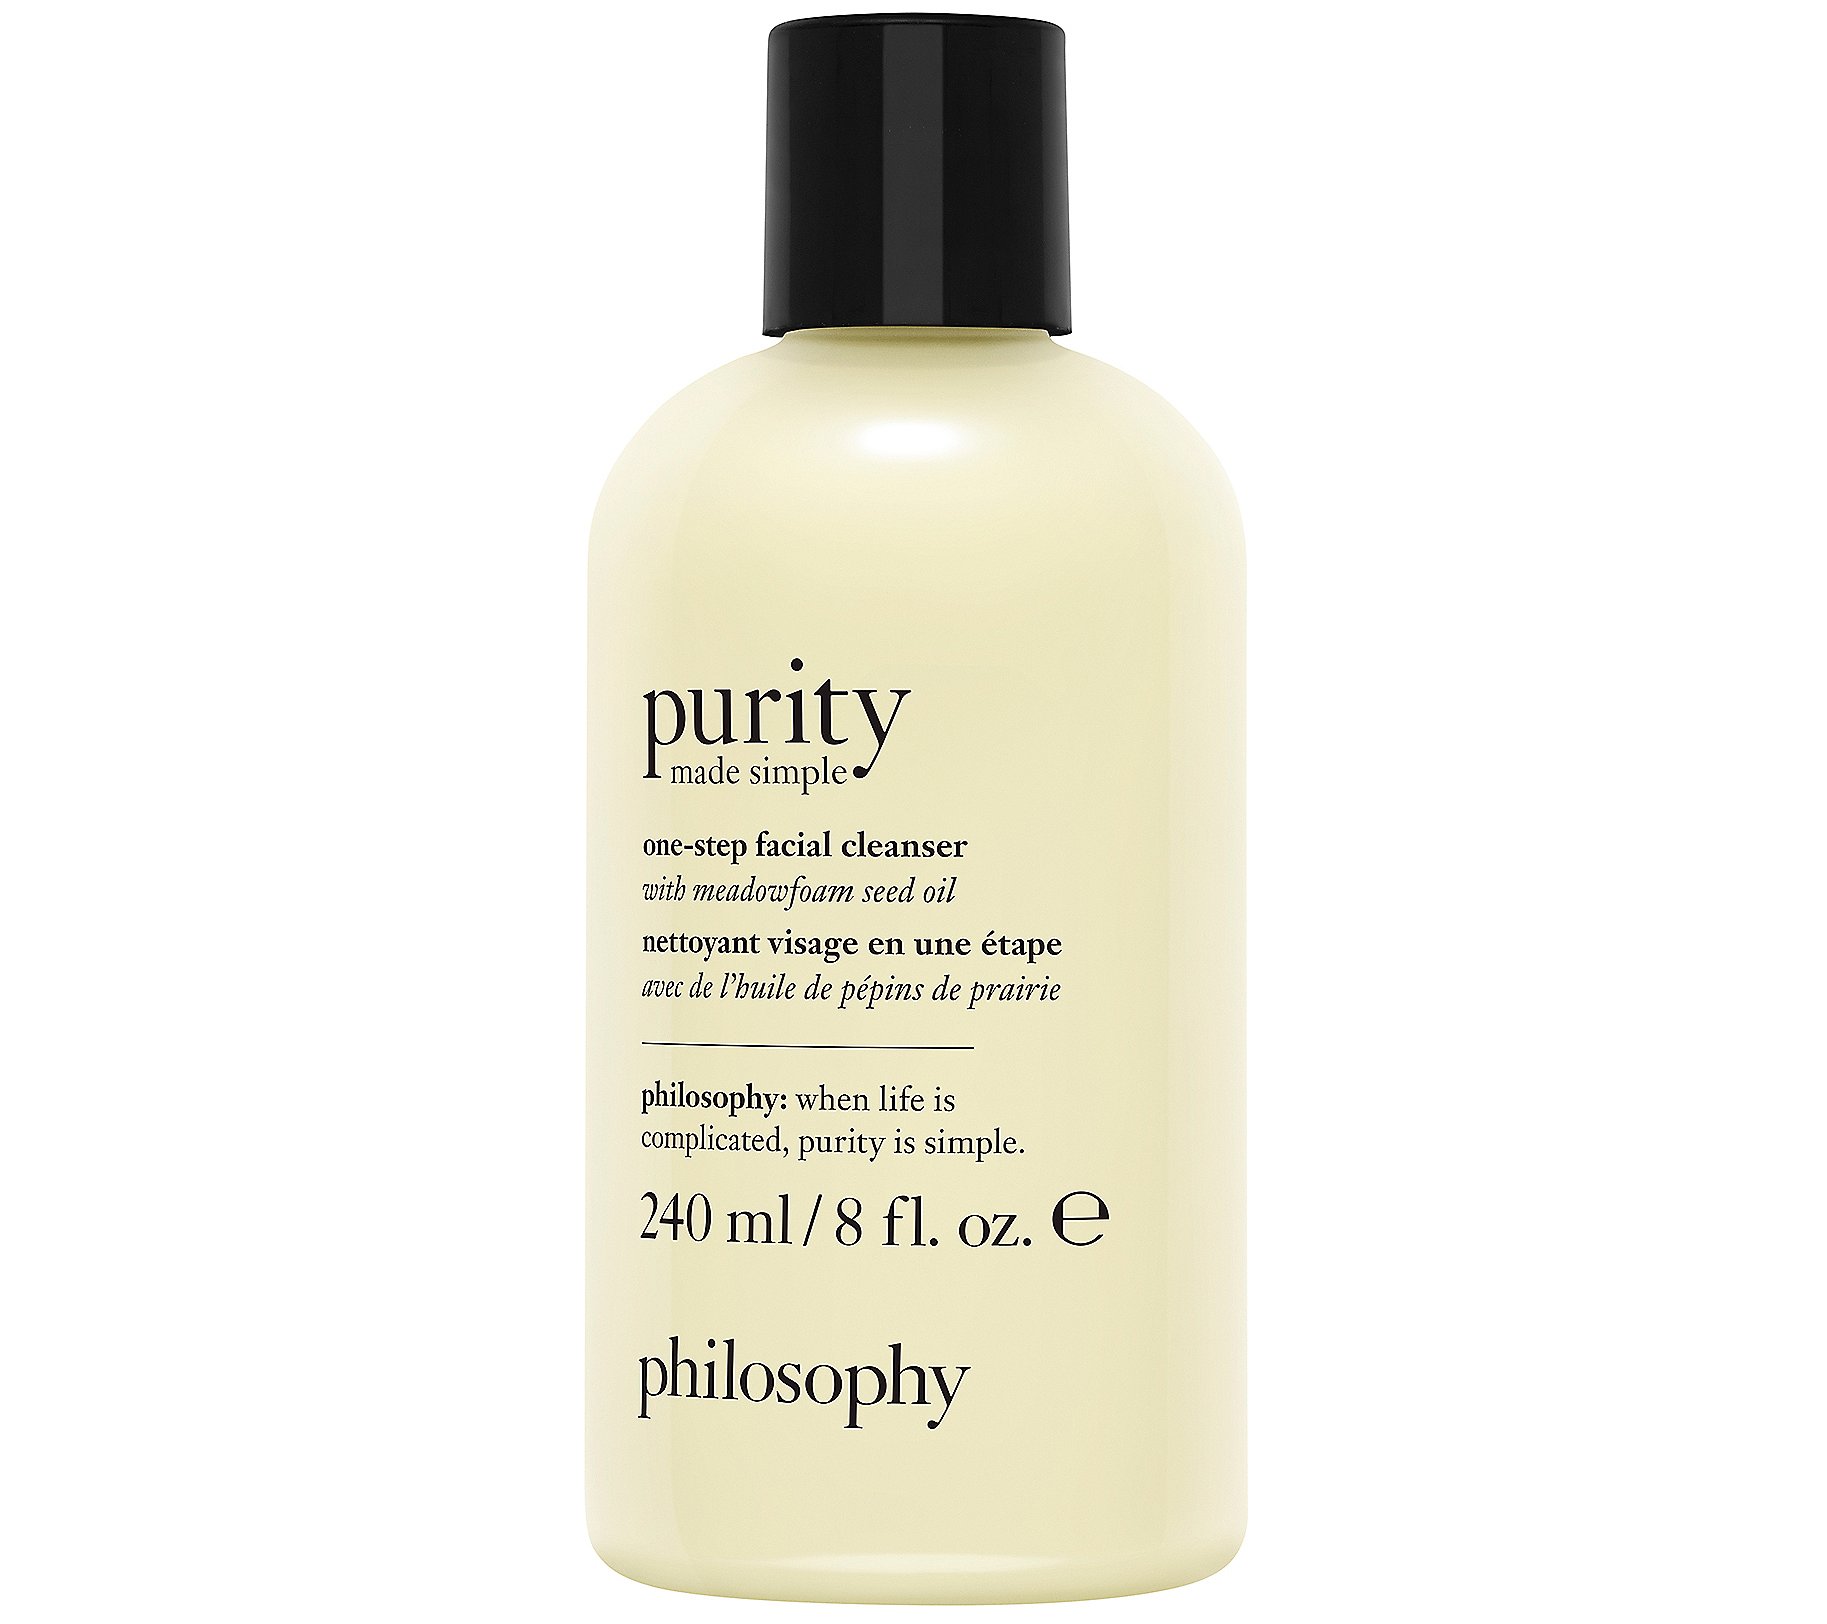 Philosophy 8-oz purity made simple cleanser $15.00